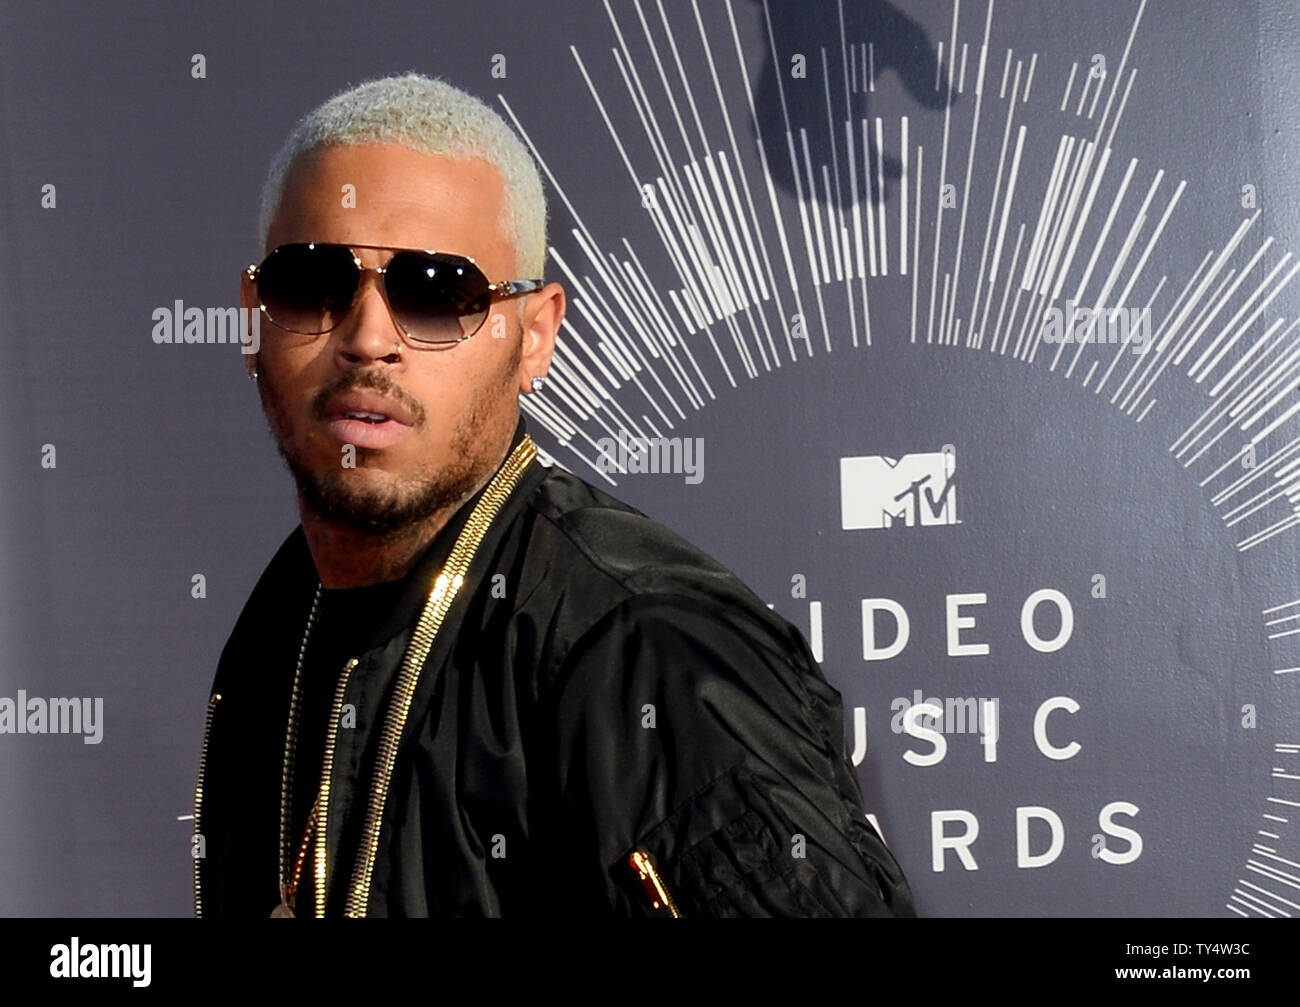 Chris Brown arrives at the 2014 MTV Video Music Awards at the Forum in Inglewood, California on August 24, 2014.  UPI/Jim Ruymen Stock Photo